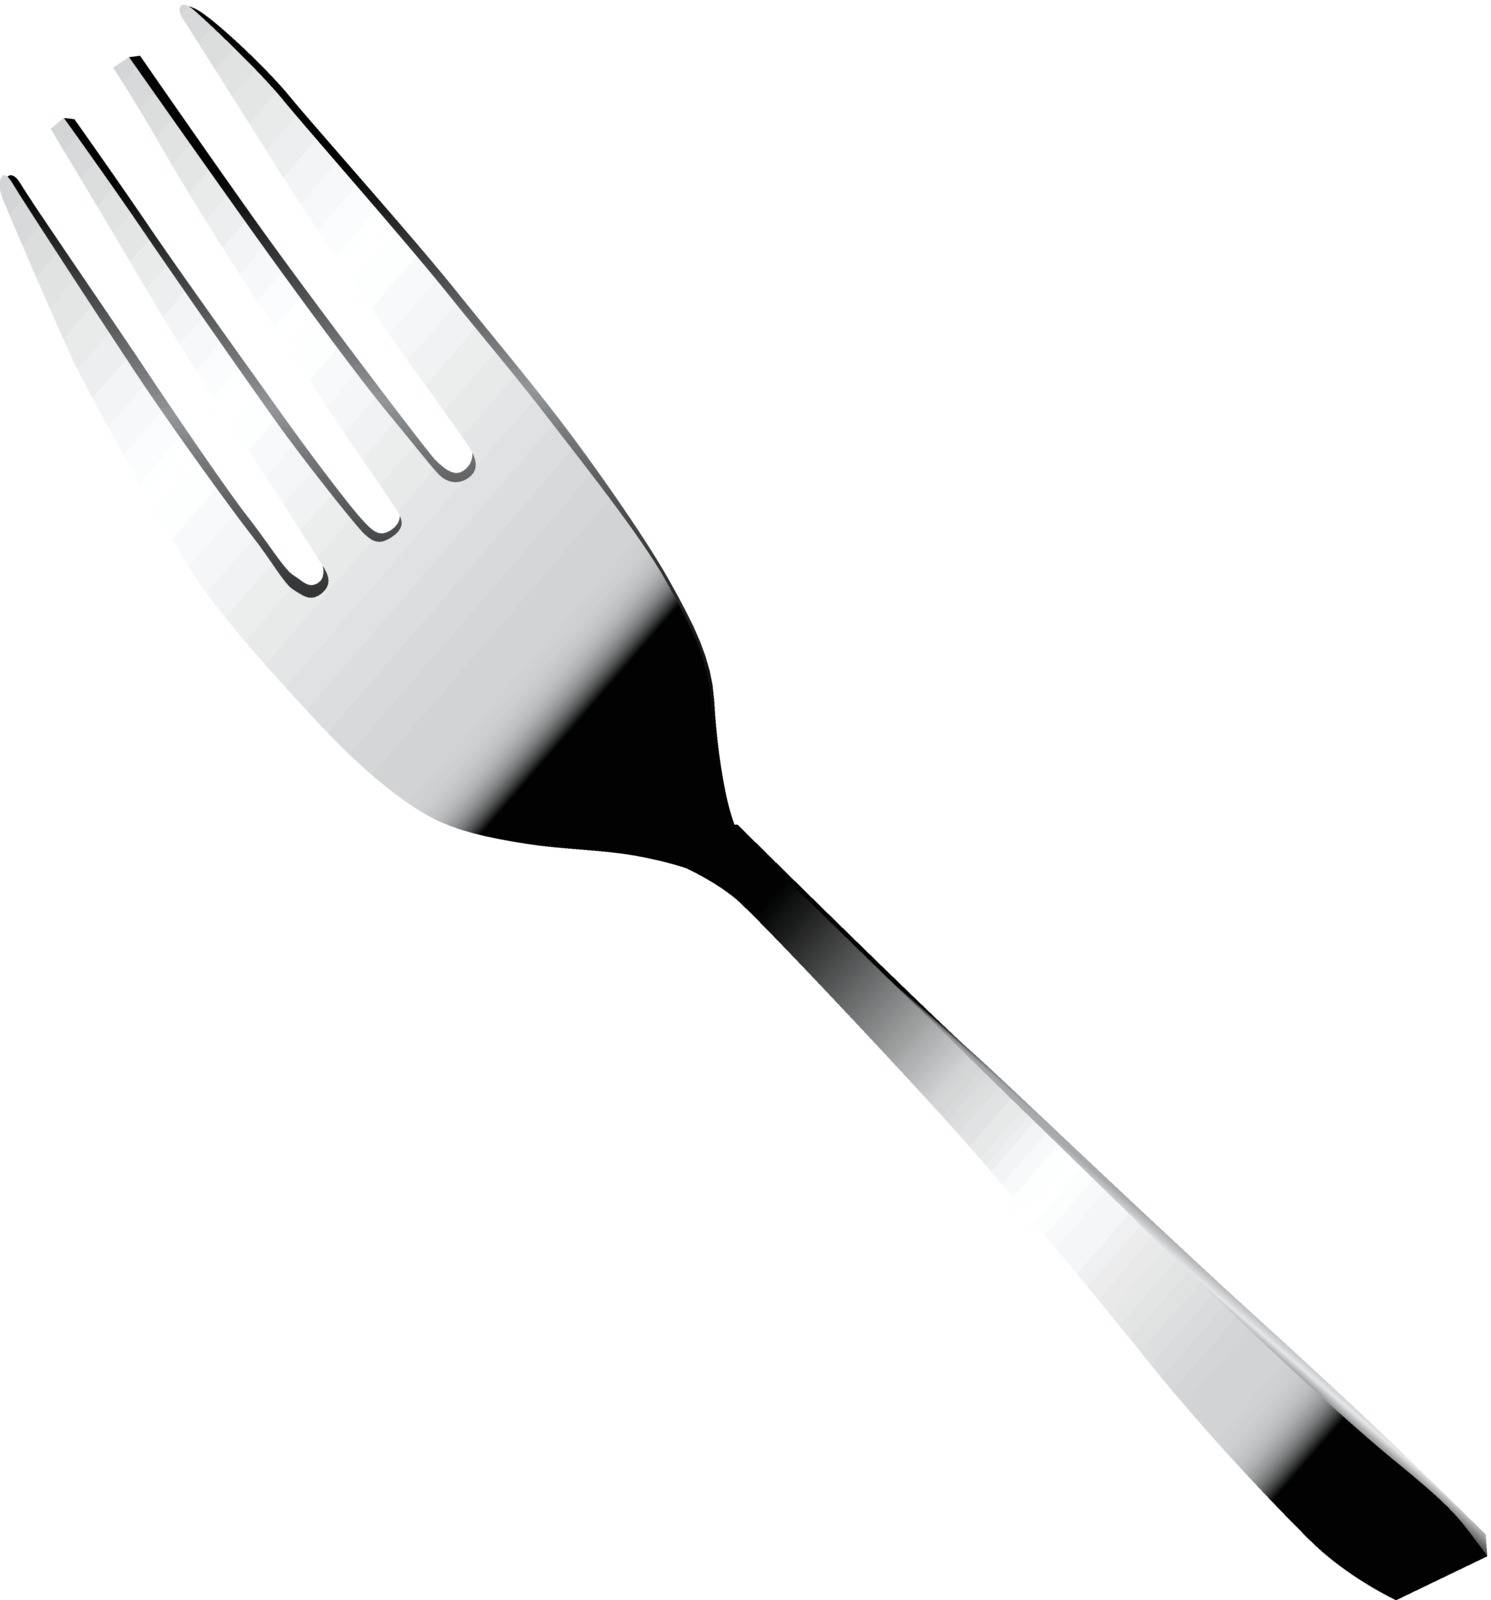 Steel fork - cutlery for main dishes. Vector illustration.